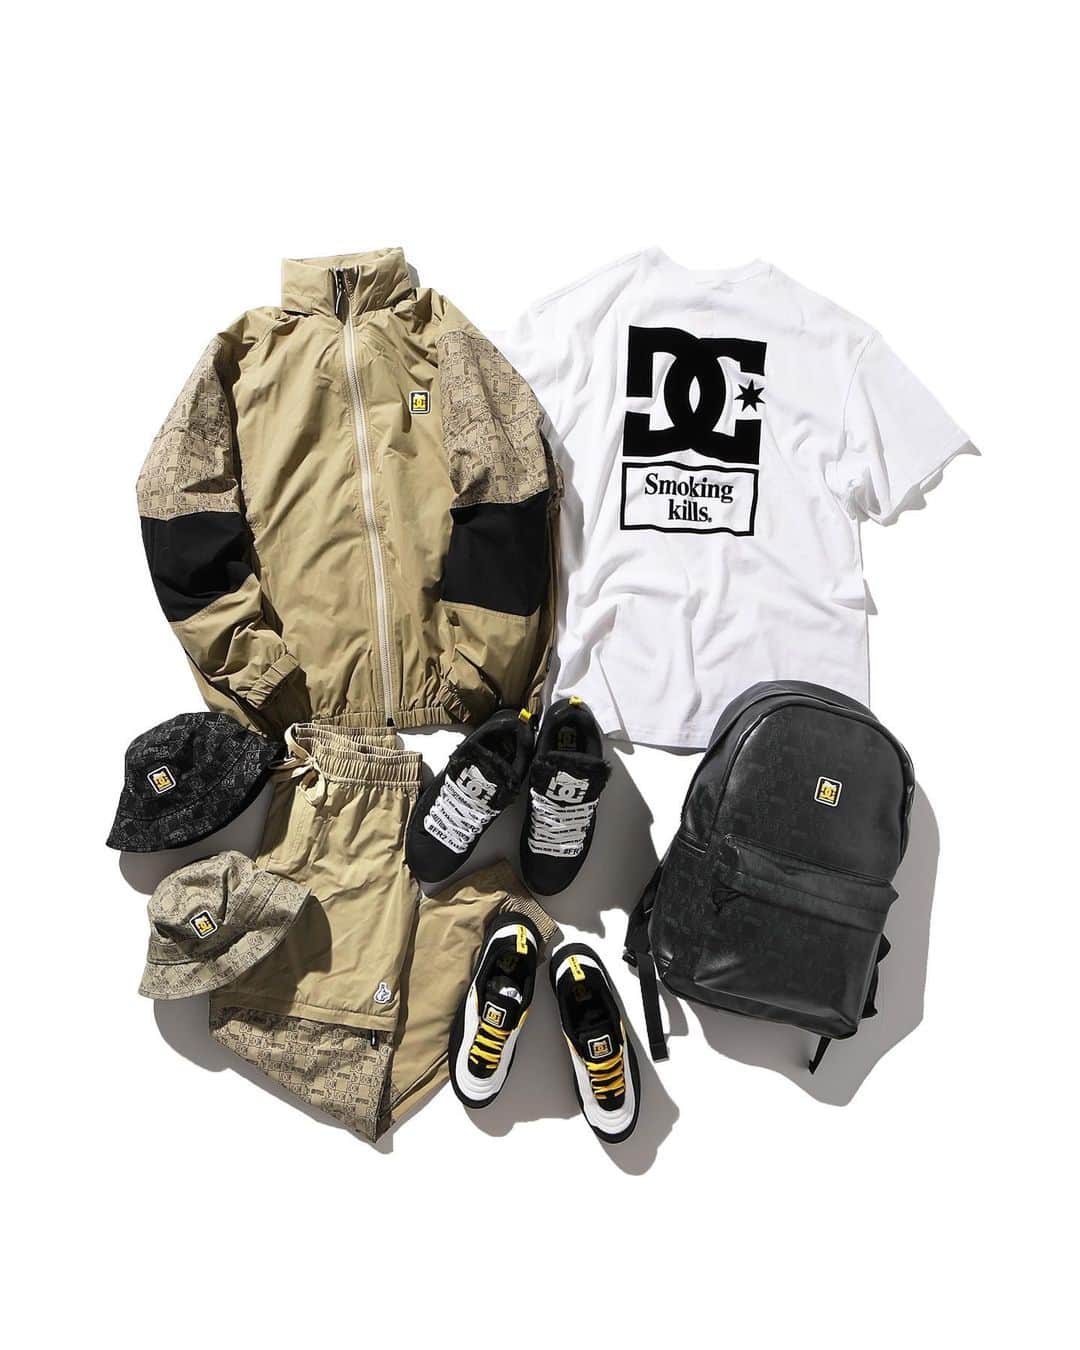 #FR2さんのインスタグラム写真 - (#FR2Instagram)「DC Shoes × #FR2 The COURT GRAFFIK and WILLIAMS SLIM sneakers will be on sale on Saturday January 23, along with other apparel items.There will be five items in total: a T-shirt with a limited collaboration logo, a matching jacket and pants set, a bucket hat with an all-over logo, and a backpack.The lineup has a great street design in classic DC style. *The sale time on @________gr8 ONLINE has changed from 10am to 9am.  DC Shoes × #FR2 “COURT GRAFFIK”“WILLIAMS SLIM”のスニーカー2型に加えアパレル商品も同時に1月23日(土)発売します。コラボレーション限定ロゴのTシャツに、セットアップでも着用できるジャケットとパンツ、総柄ロゴのバケットハット、BAGPACKの計5型のDCらしいストリート感溢れるラインナップです。 ※@________gr8 ONLINEでの発売時間が午前10時から午前9時に変更となっております。  DC Shoes × #FR2 除了「COURT GRAFFIK」與「WILLIAMS SLIM」這兩款運動鞋外我們還會在1月23日（六）同時推出服飾類商品。 而且也可以和合作活動限定商標的襯衫搭配著一起穿著商品類型包括夾克、褲裝、整面商標花紋的漁夫帽與背包等，總共有5種。商品內容滿溢著相當具DC風格的街頭感。 關於在※@________gr8 ONLINE的發售時間 目前已經從早上10點變更為早上9點。  DC Shoes × #FR2 “COURT GRAFFIK”“WILLIAMS SLIM” 2 款运动鞋和服饰商品同时将于 1 月 23 日（六）开始发售。有联名限定商标的 T 恤，和可与之搭配穿着的夹克衫与短裤、整体商标花纹的渔夫帽、背包共 5 款。产品系列充满 DC 的街头感风格。 ※@________gr8 线上发售的时间 从上午 10 点更改为上午 9 点。  #DCshoes#FR2#fxxkingrabbits#頭狂色情兎  #Smokingkills®︎#caution」1月20日 20時06分 - fxxkingrabbits